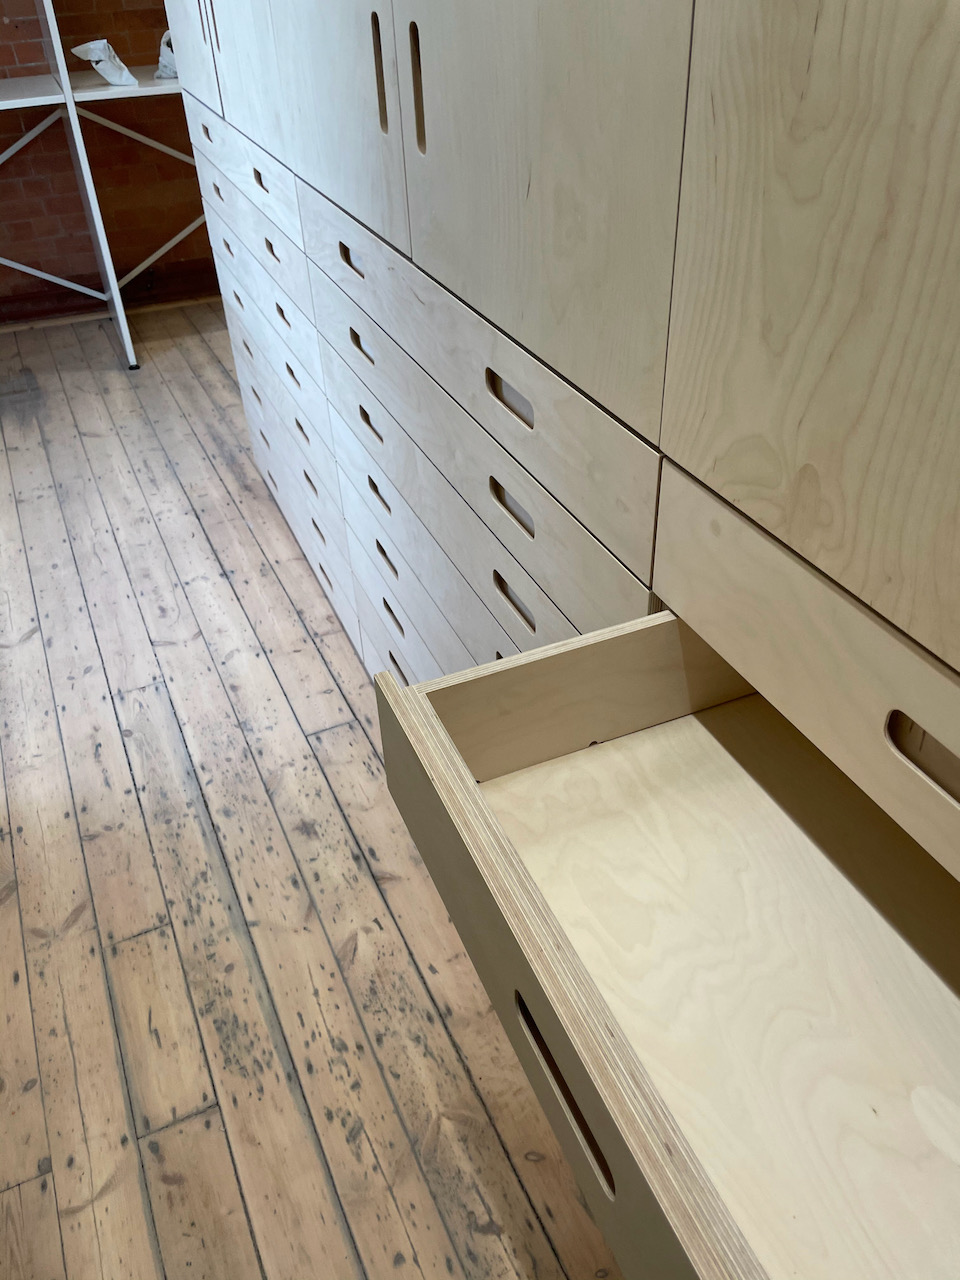 An empty drawer is open within a new plan chest unit